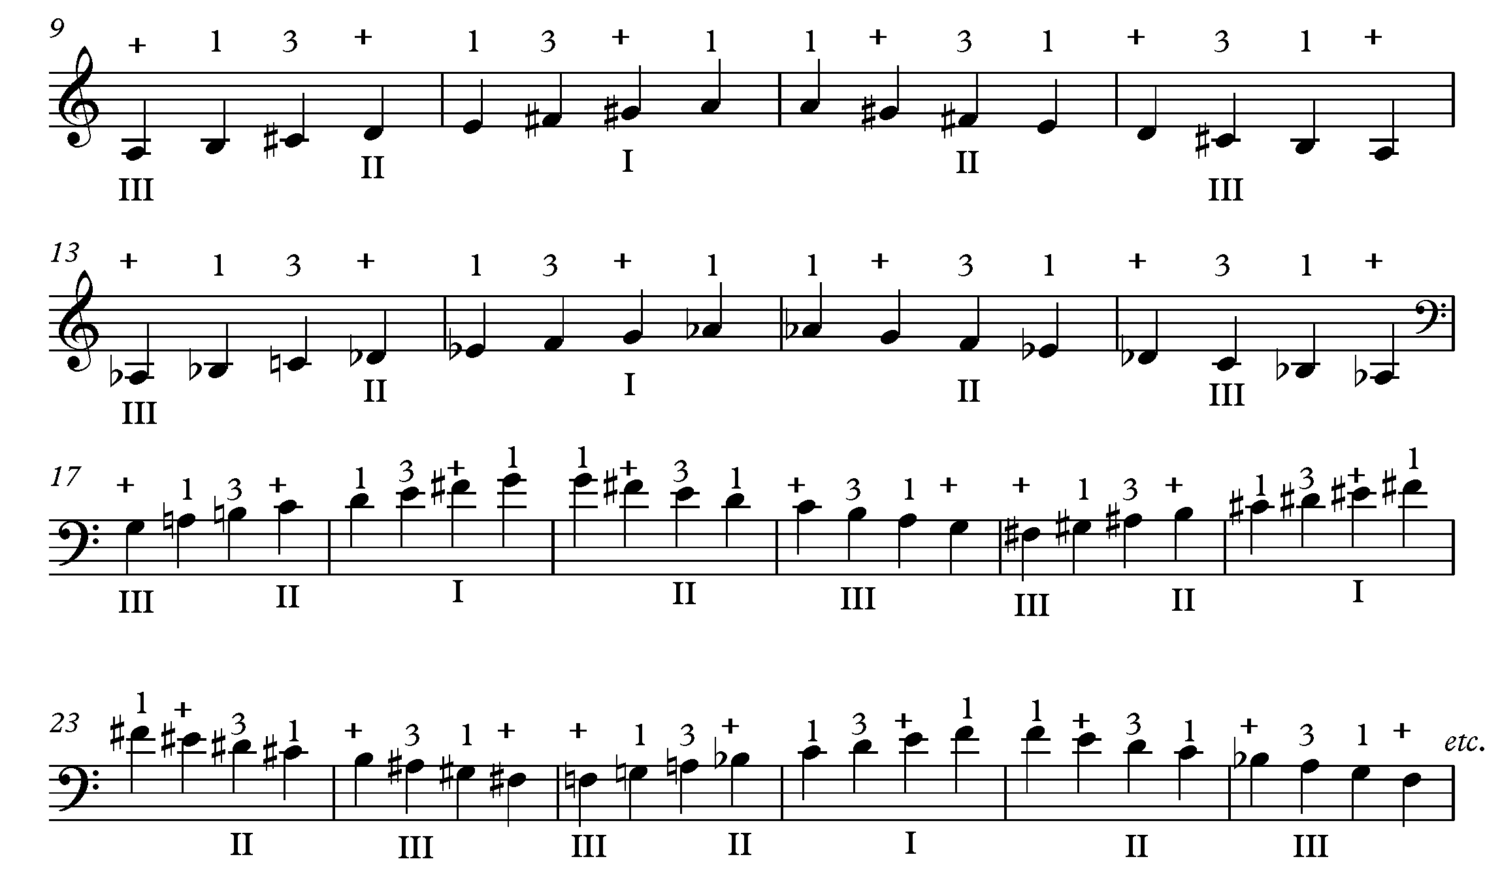 Thumb Position in the Lower Positions - Major Scale Exercise